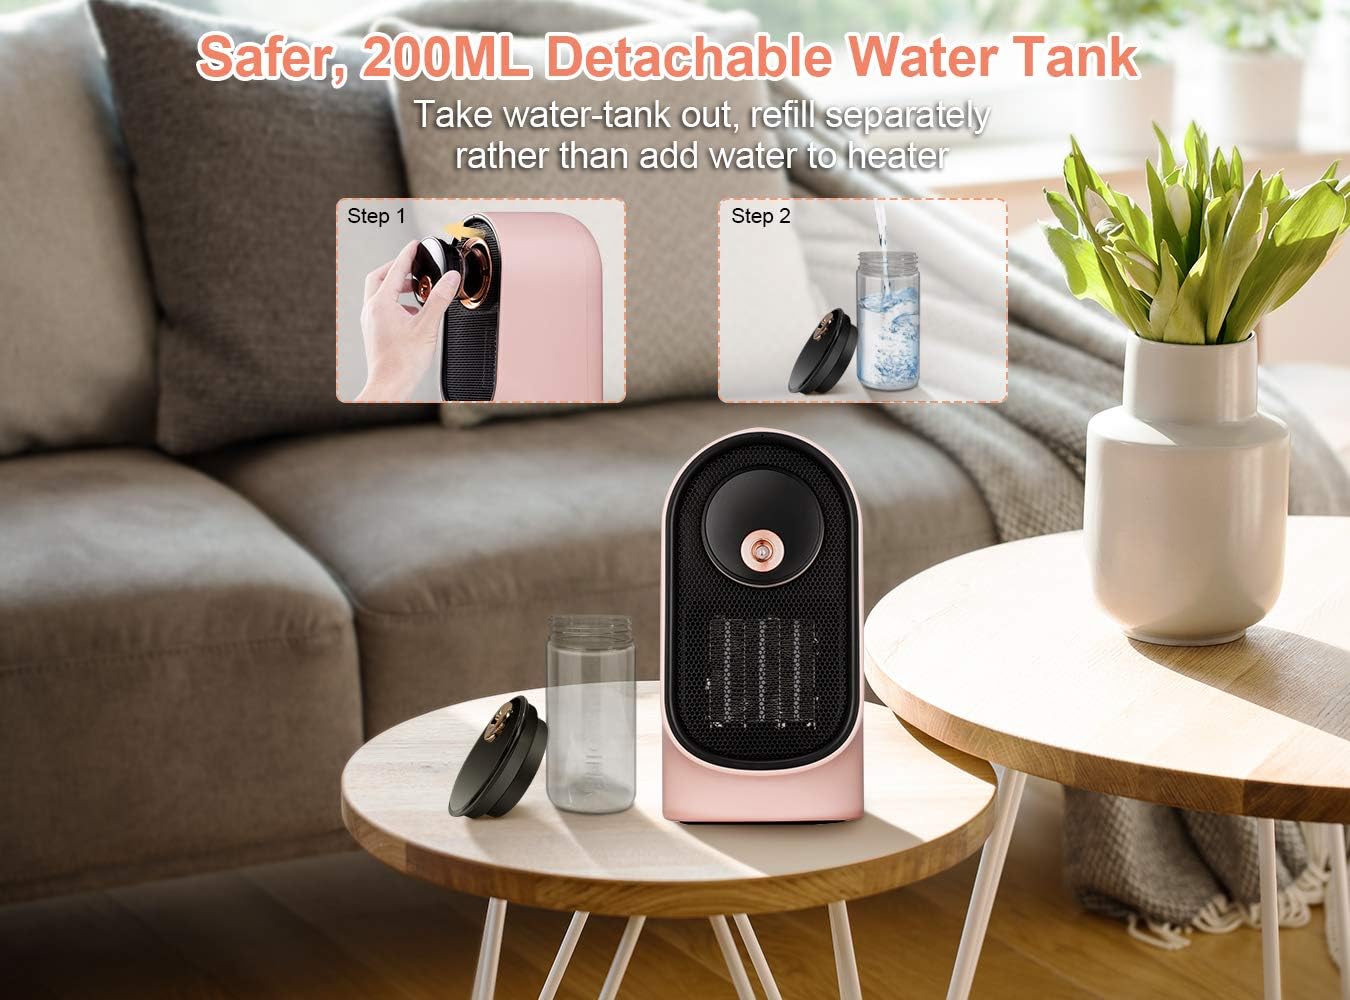 Space Heater, Portable Electric Heater with Humidifier Function, Ceramic Room Small Heater, Fast Heating Heater with Widespread Oscillation, Multi-protection, for Office Desk Bedroom Indoor Use, Pink